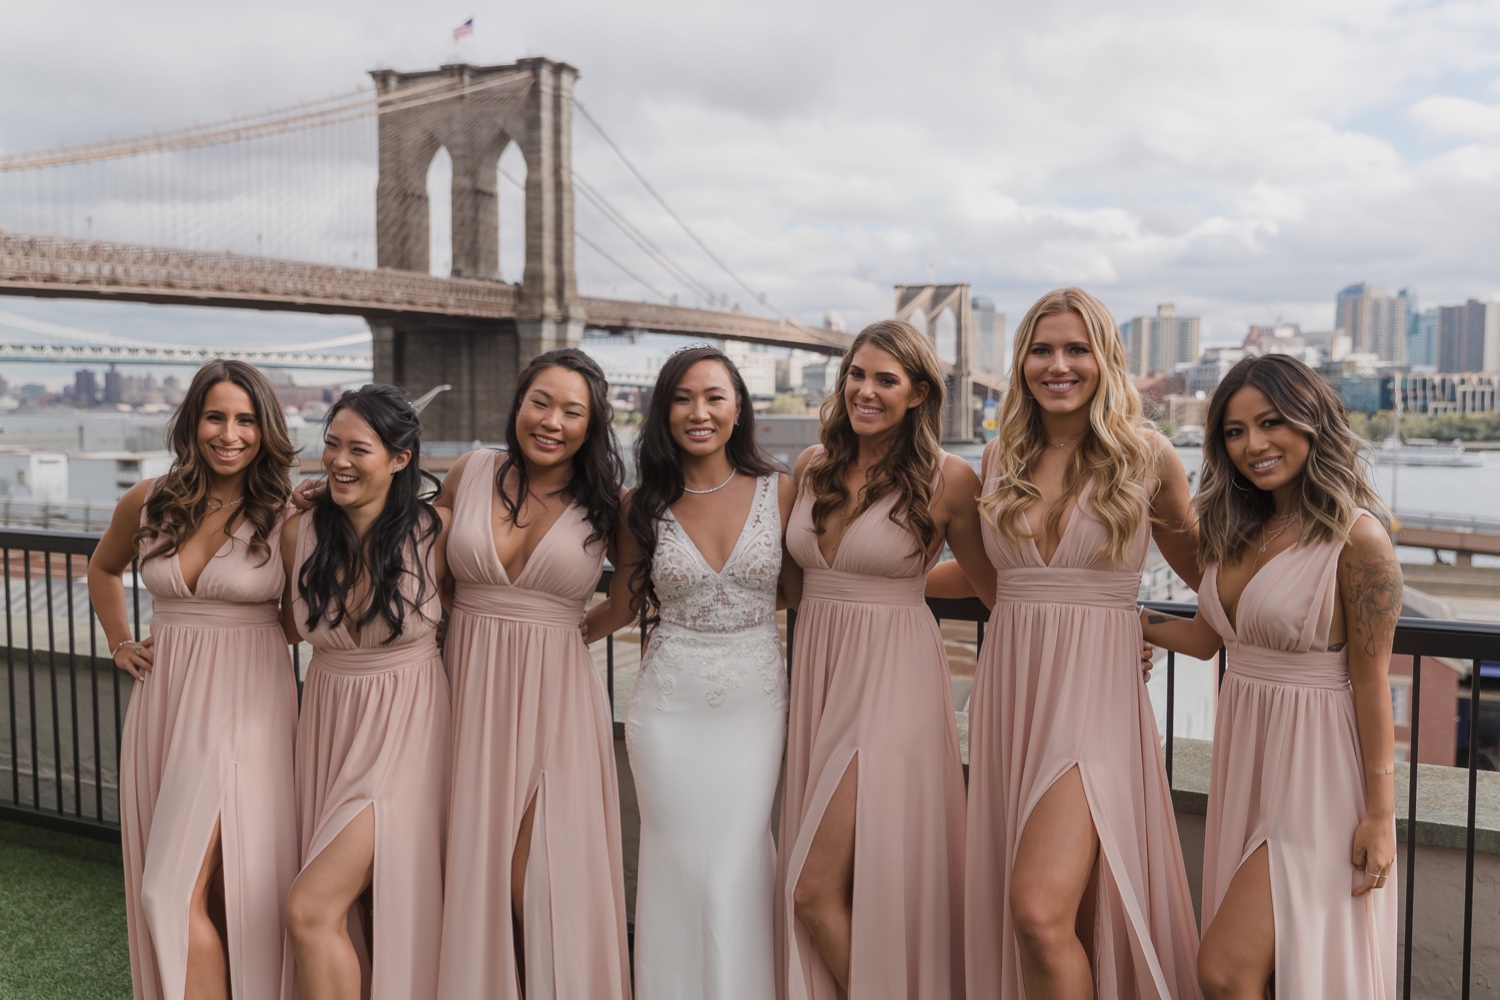 A portrait session of a bride with her wedding dress and her bridesmaids in Mr. C Seaport Hotel on a wedding day at Cipriani Wall Street in New York City. Wedding Dress by Pronovias